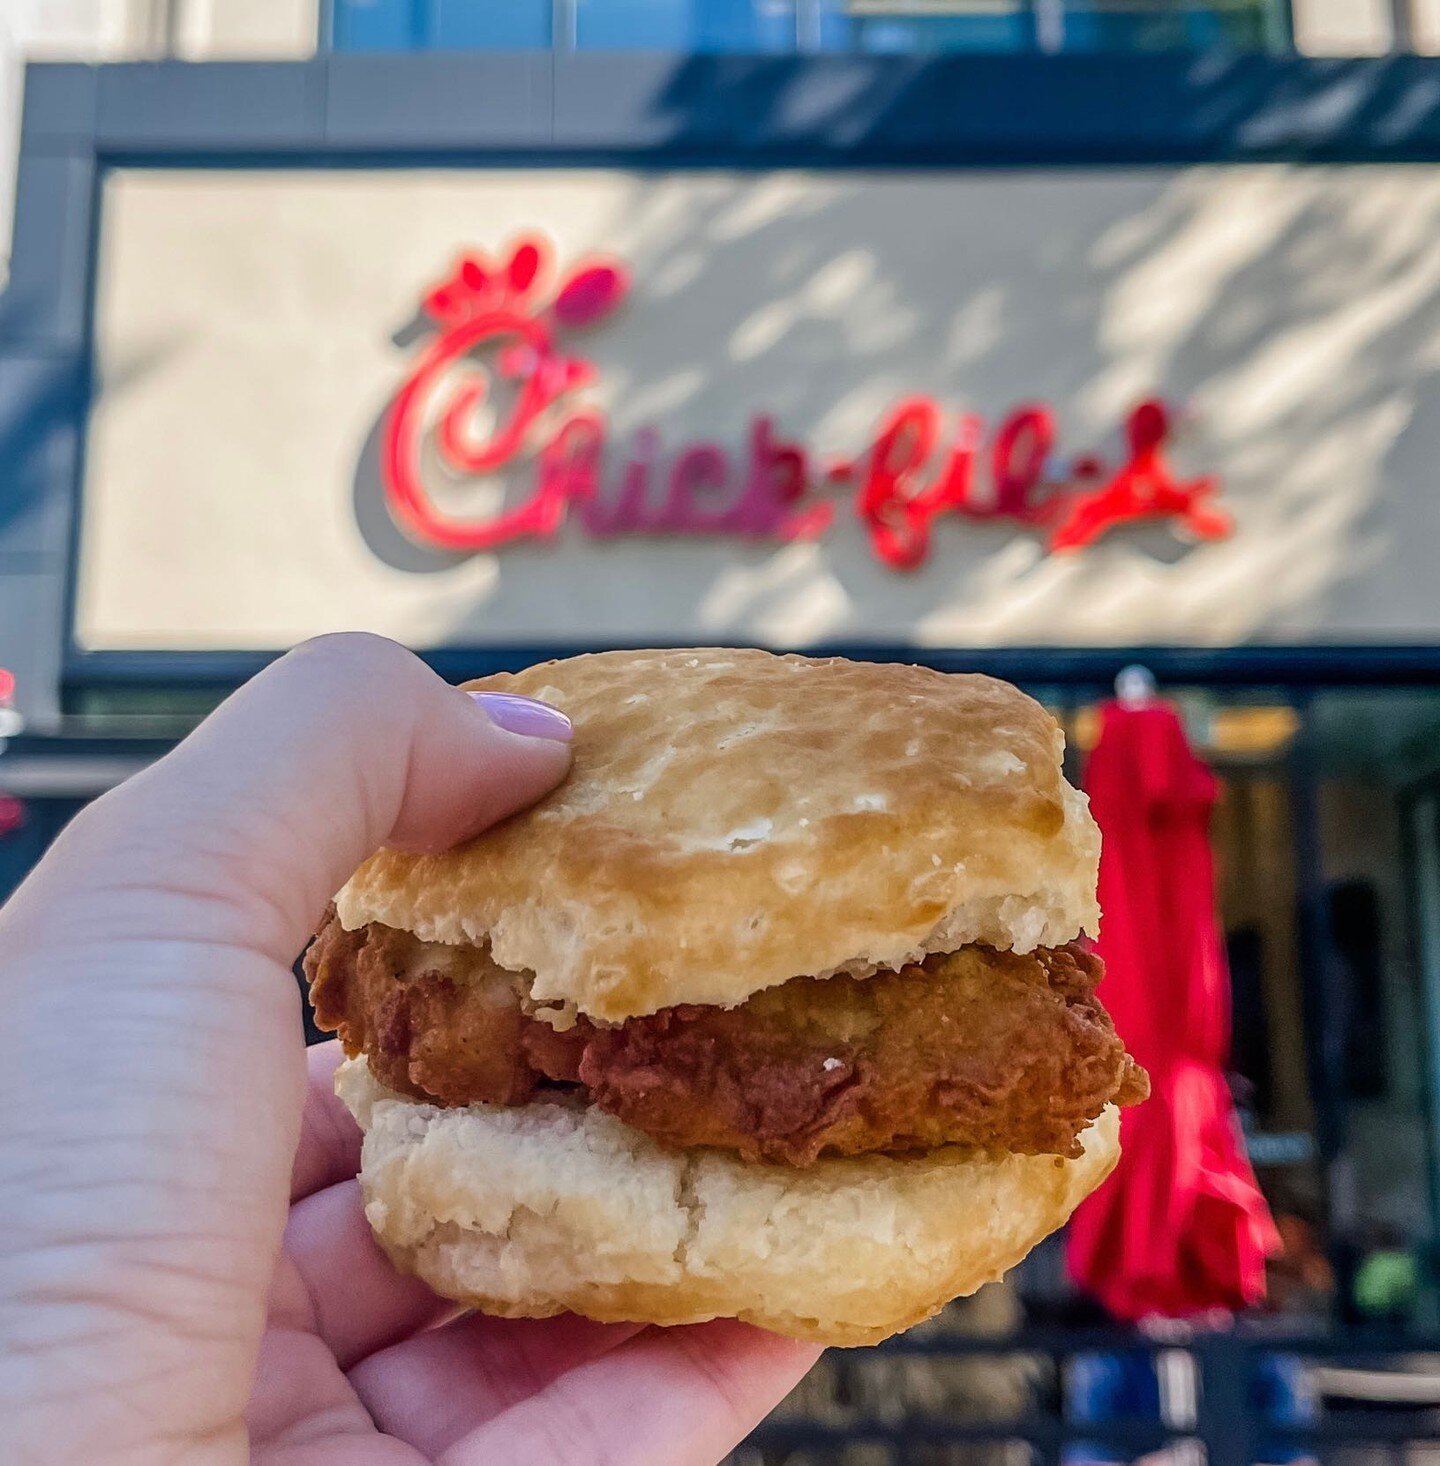 You made it to Friday! Celebrate with a Chicken Biscuit to start your day 😋
&bull;
&bull;
&bull;
#TheLittleThings #ChickfilA #MyPleasure #EatMoreChicken #EatMorChikin #HereToServe #ChickfilAMoms #OurPleasure #CFAFamily #CFA #ChickfilAIsLife #CFATeam